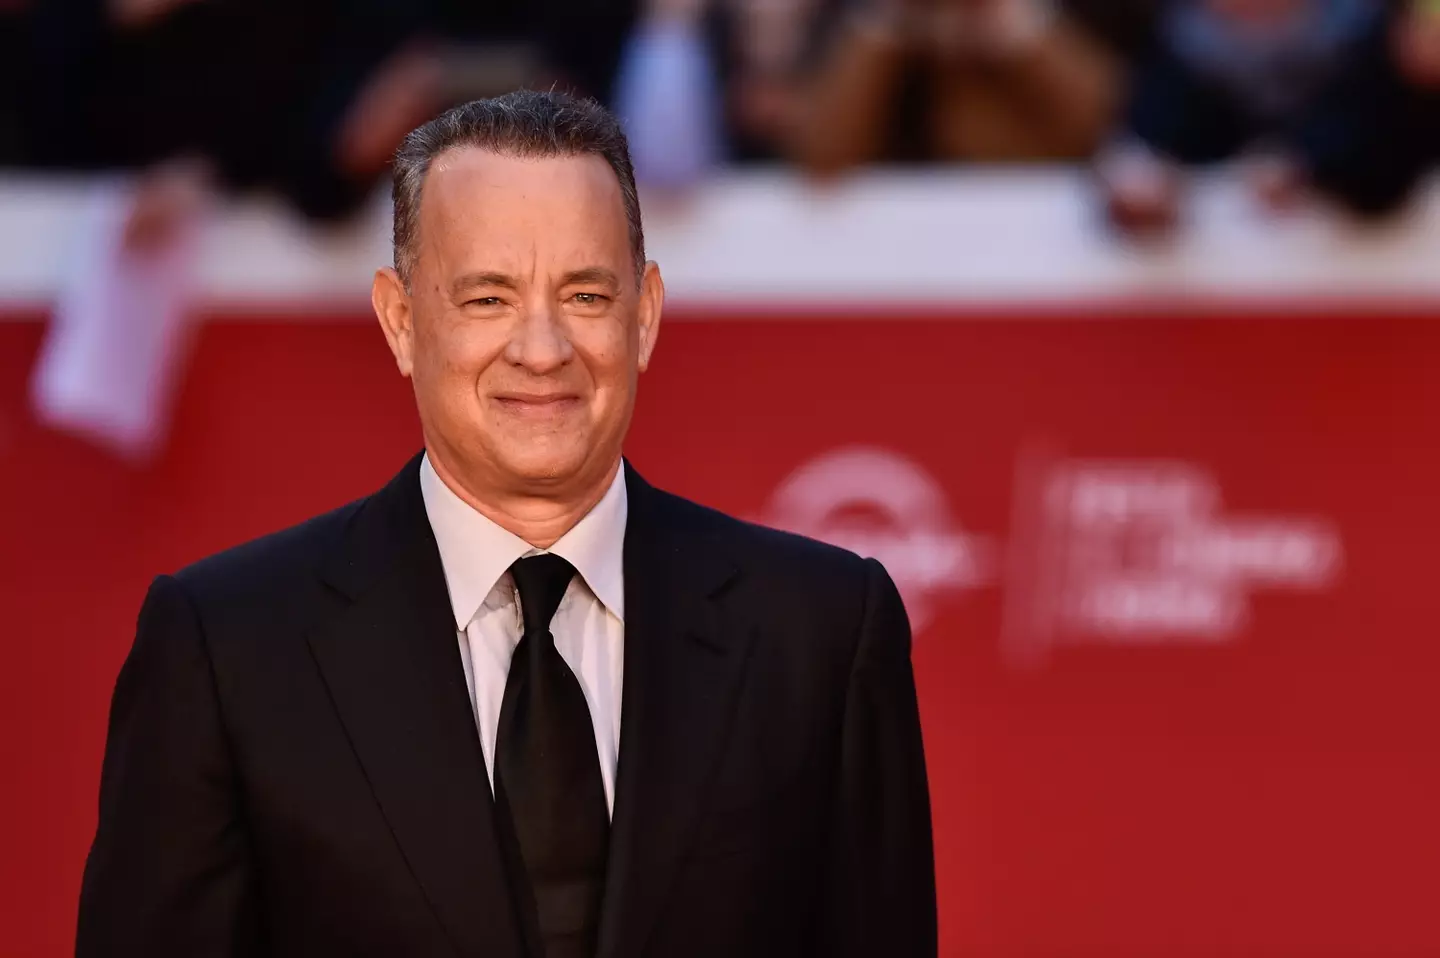 Tom Hanks has appeared in numerous Disney films over the years.